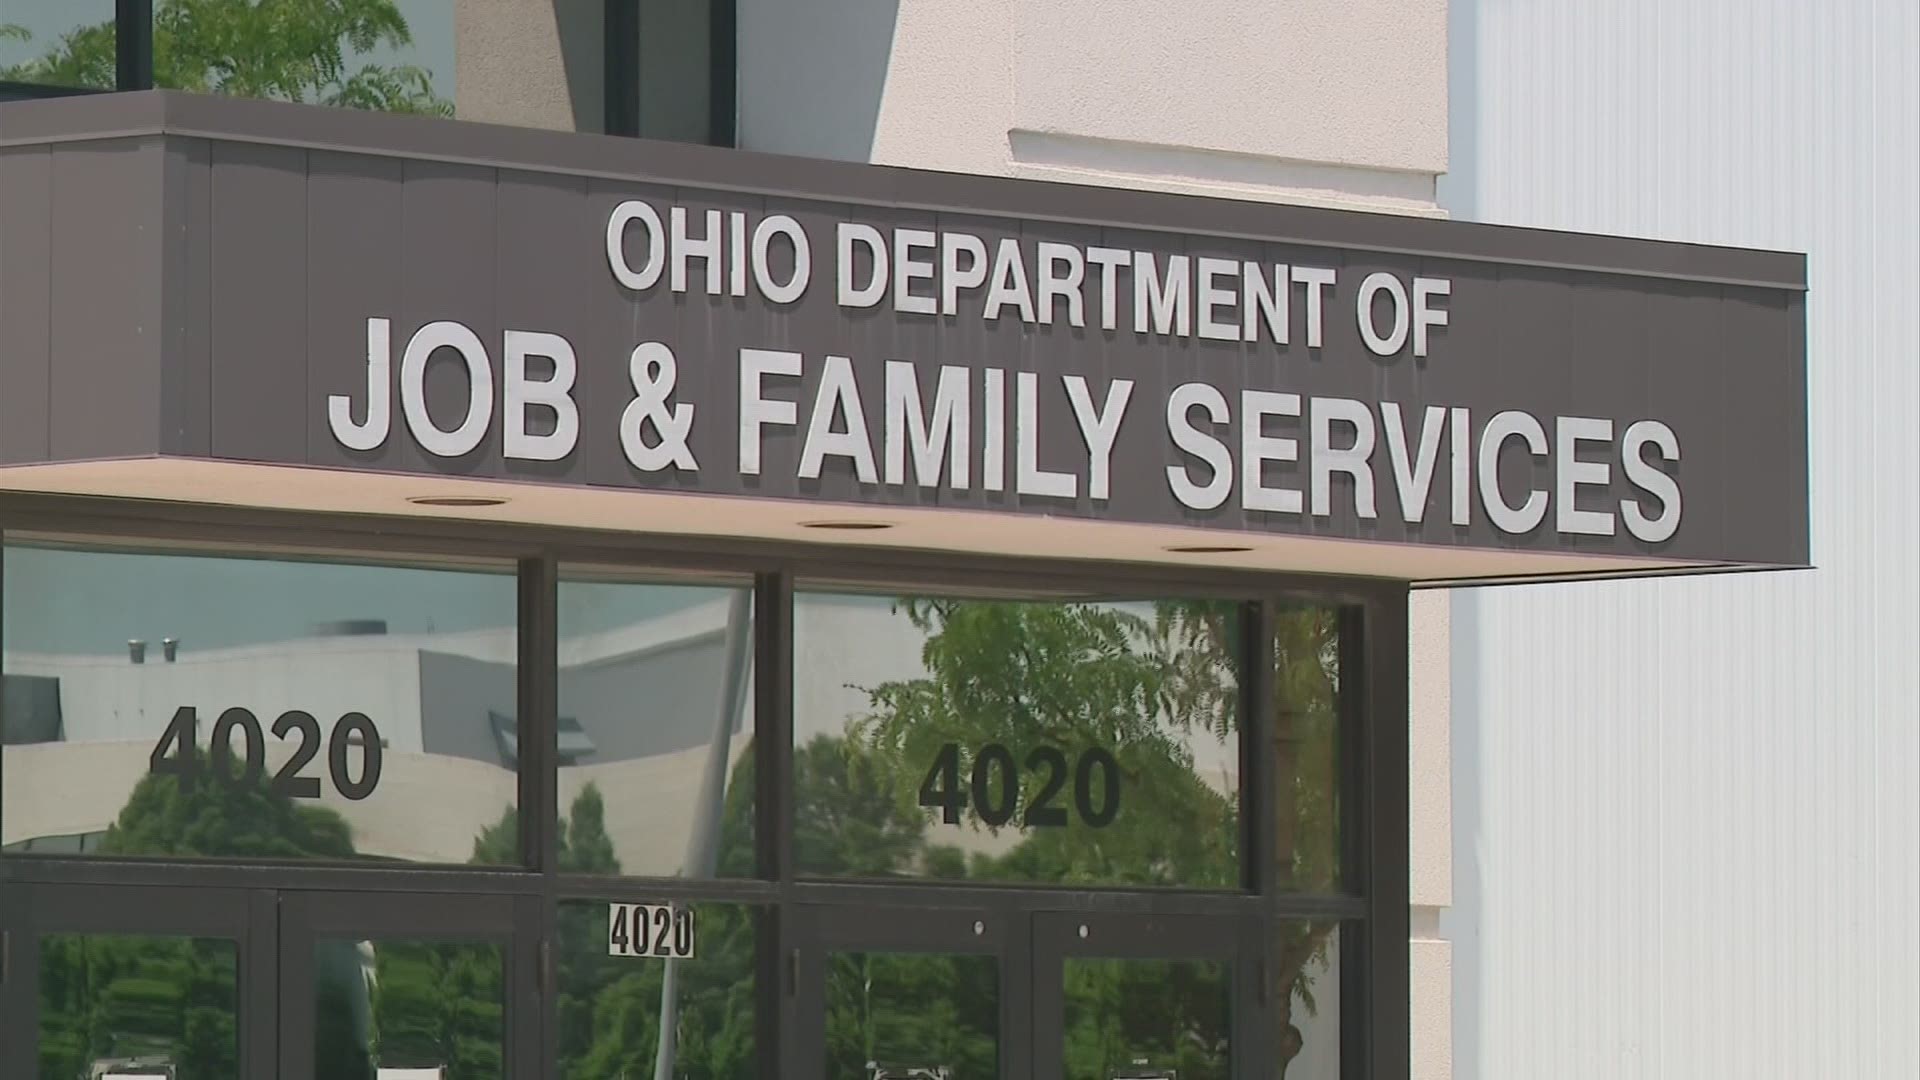 According to the latest unemployment report from the state, more than 46% of new claims filed between July 9 and July 15 have been flagged for potential fraud.